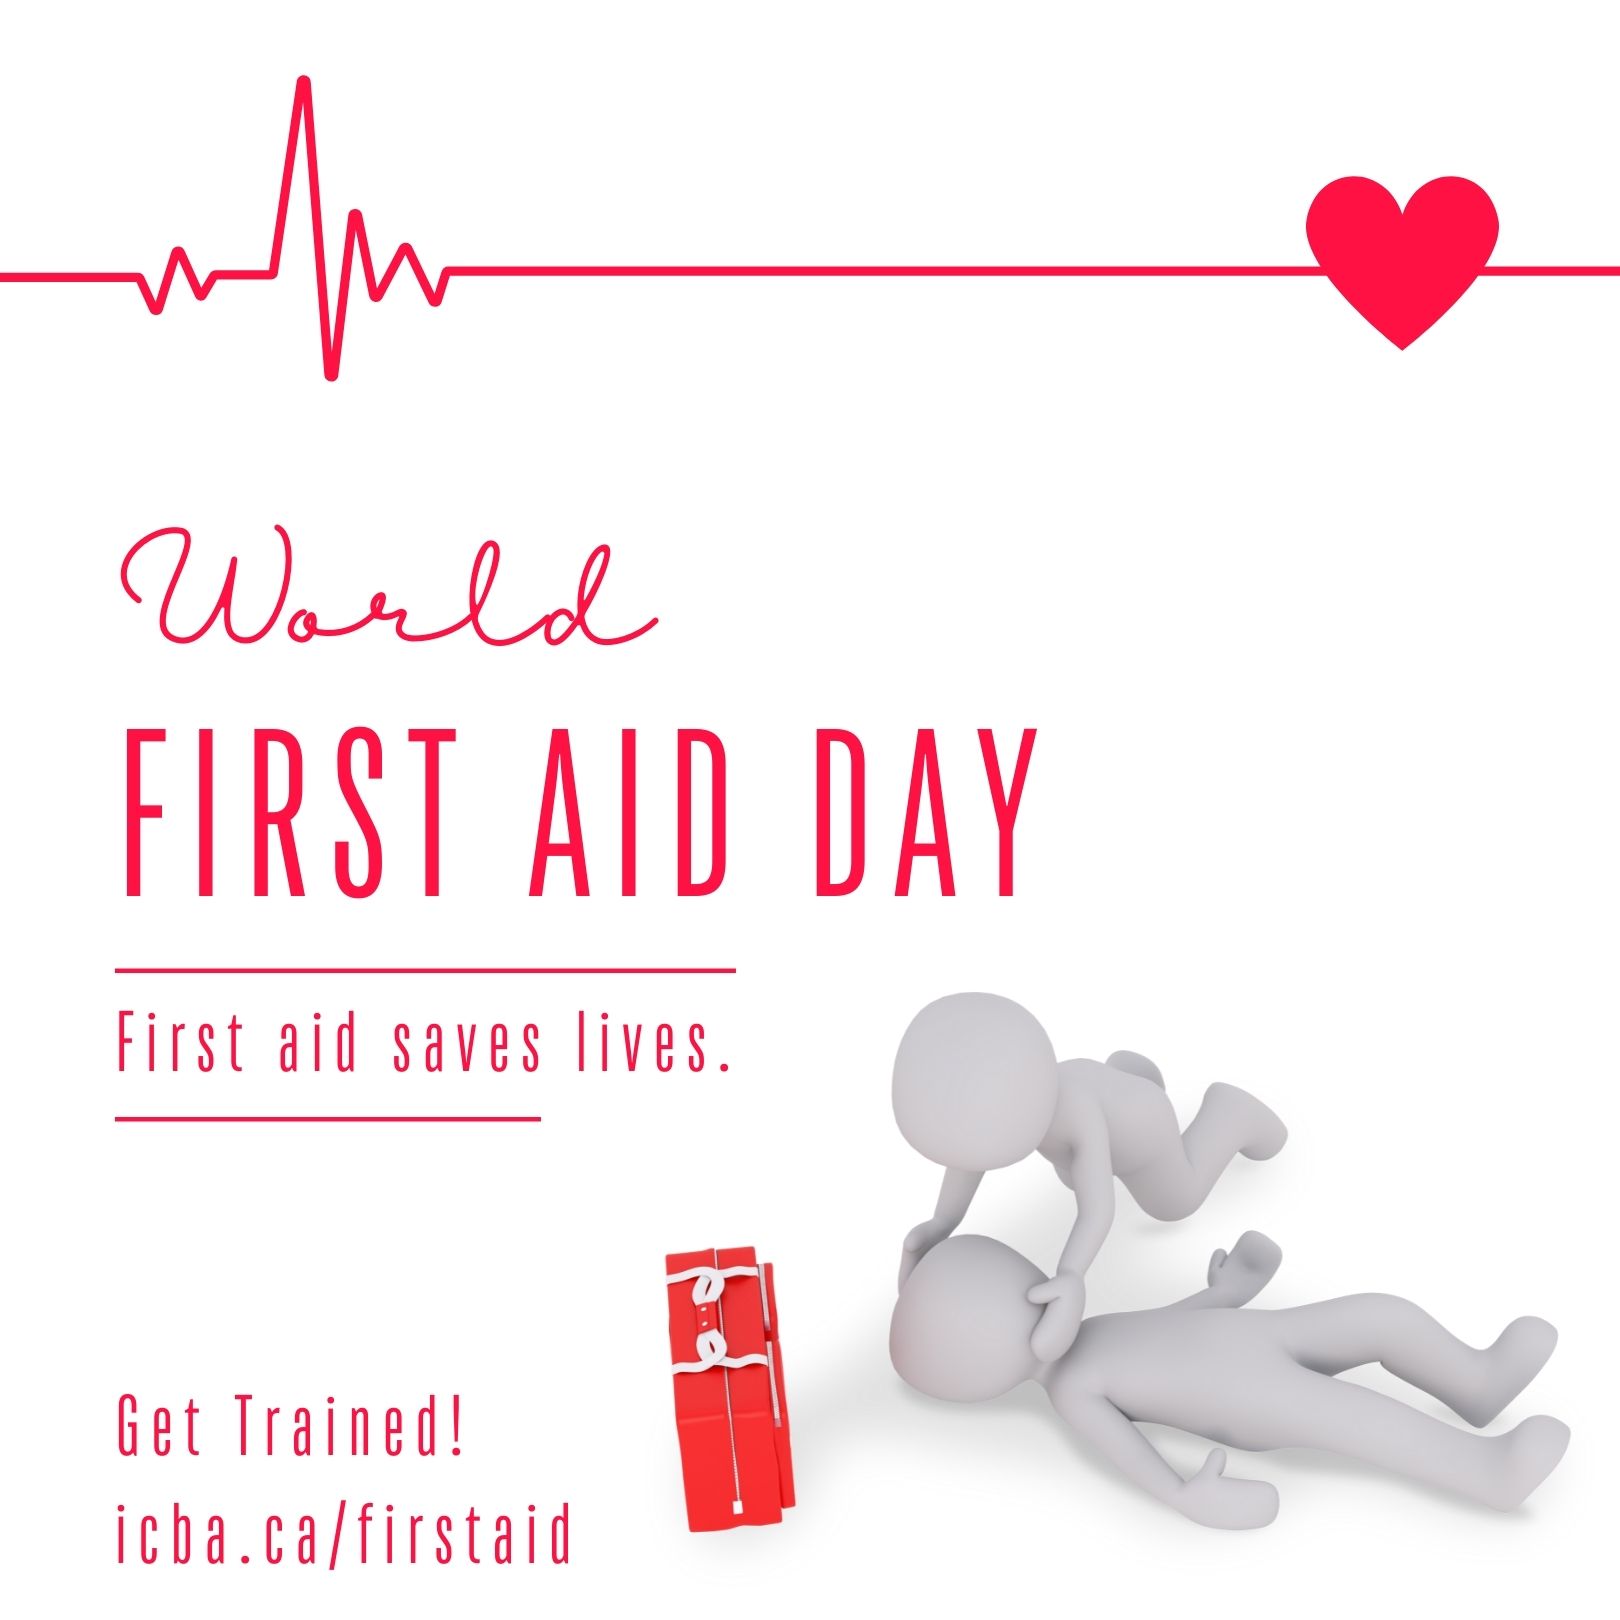 Happy World First Aid Day! The ICBA Independent